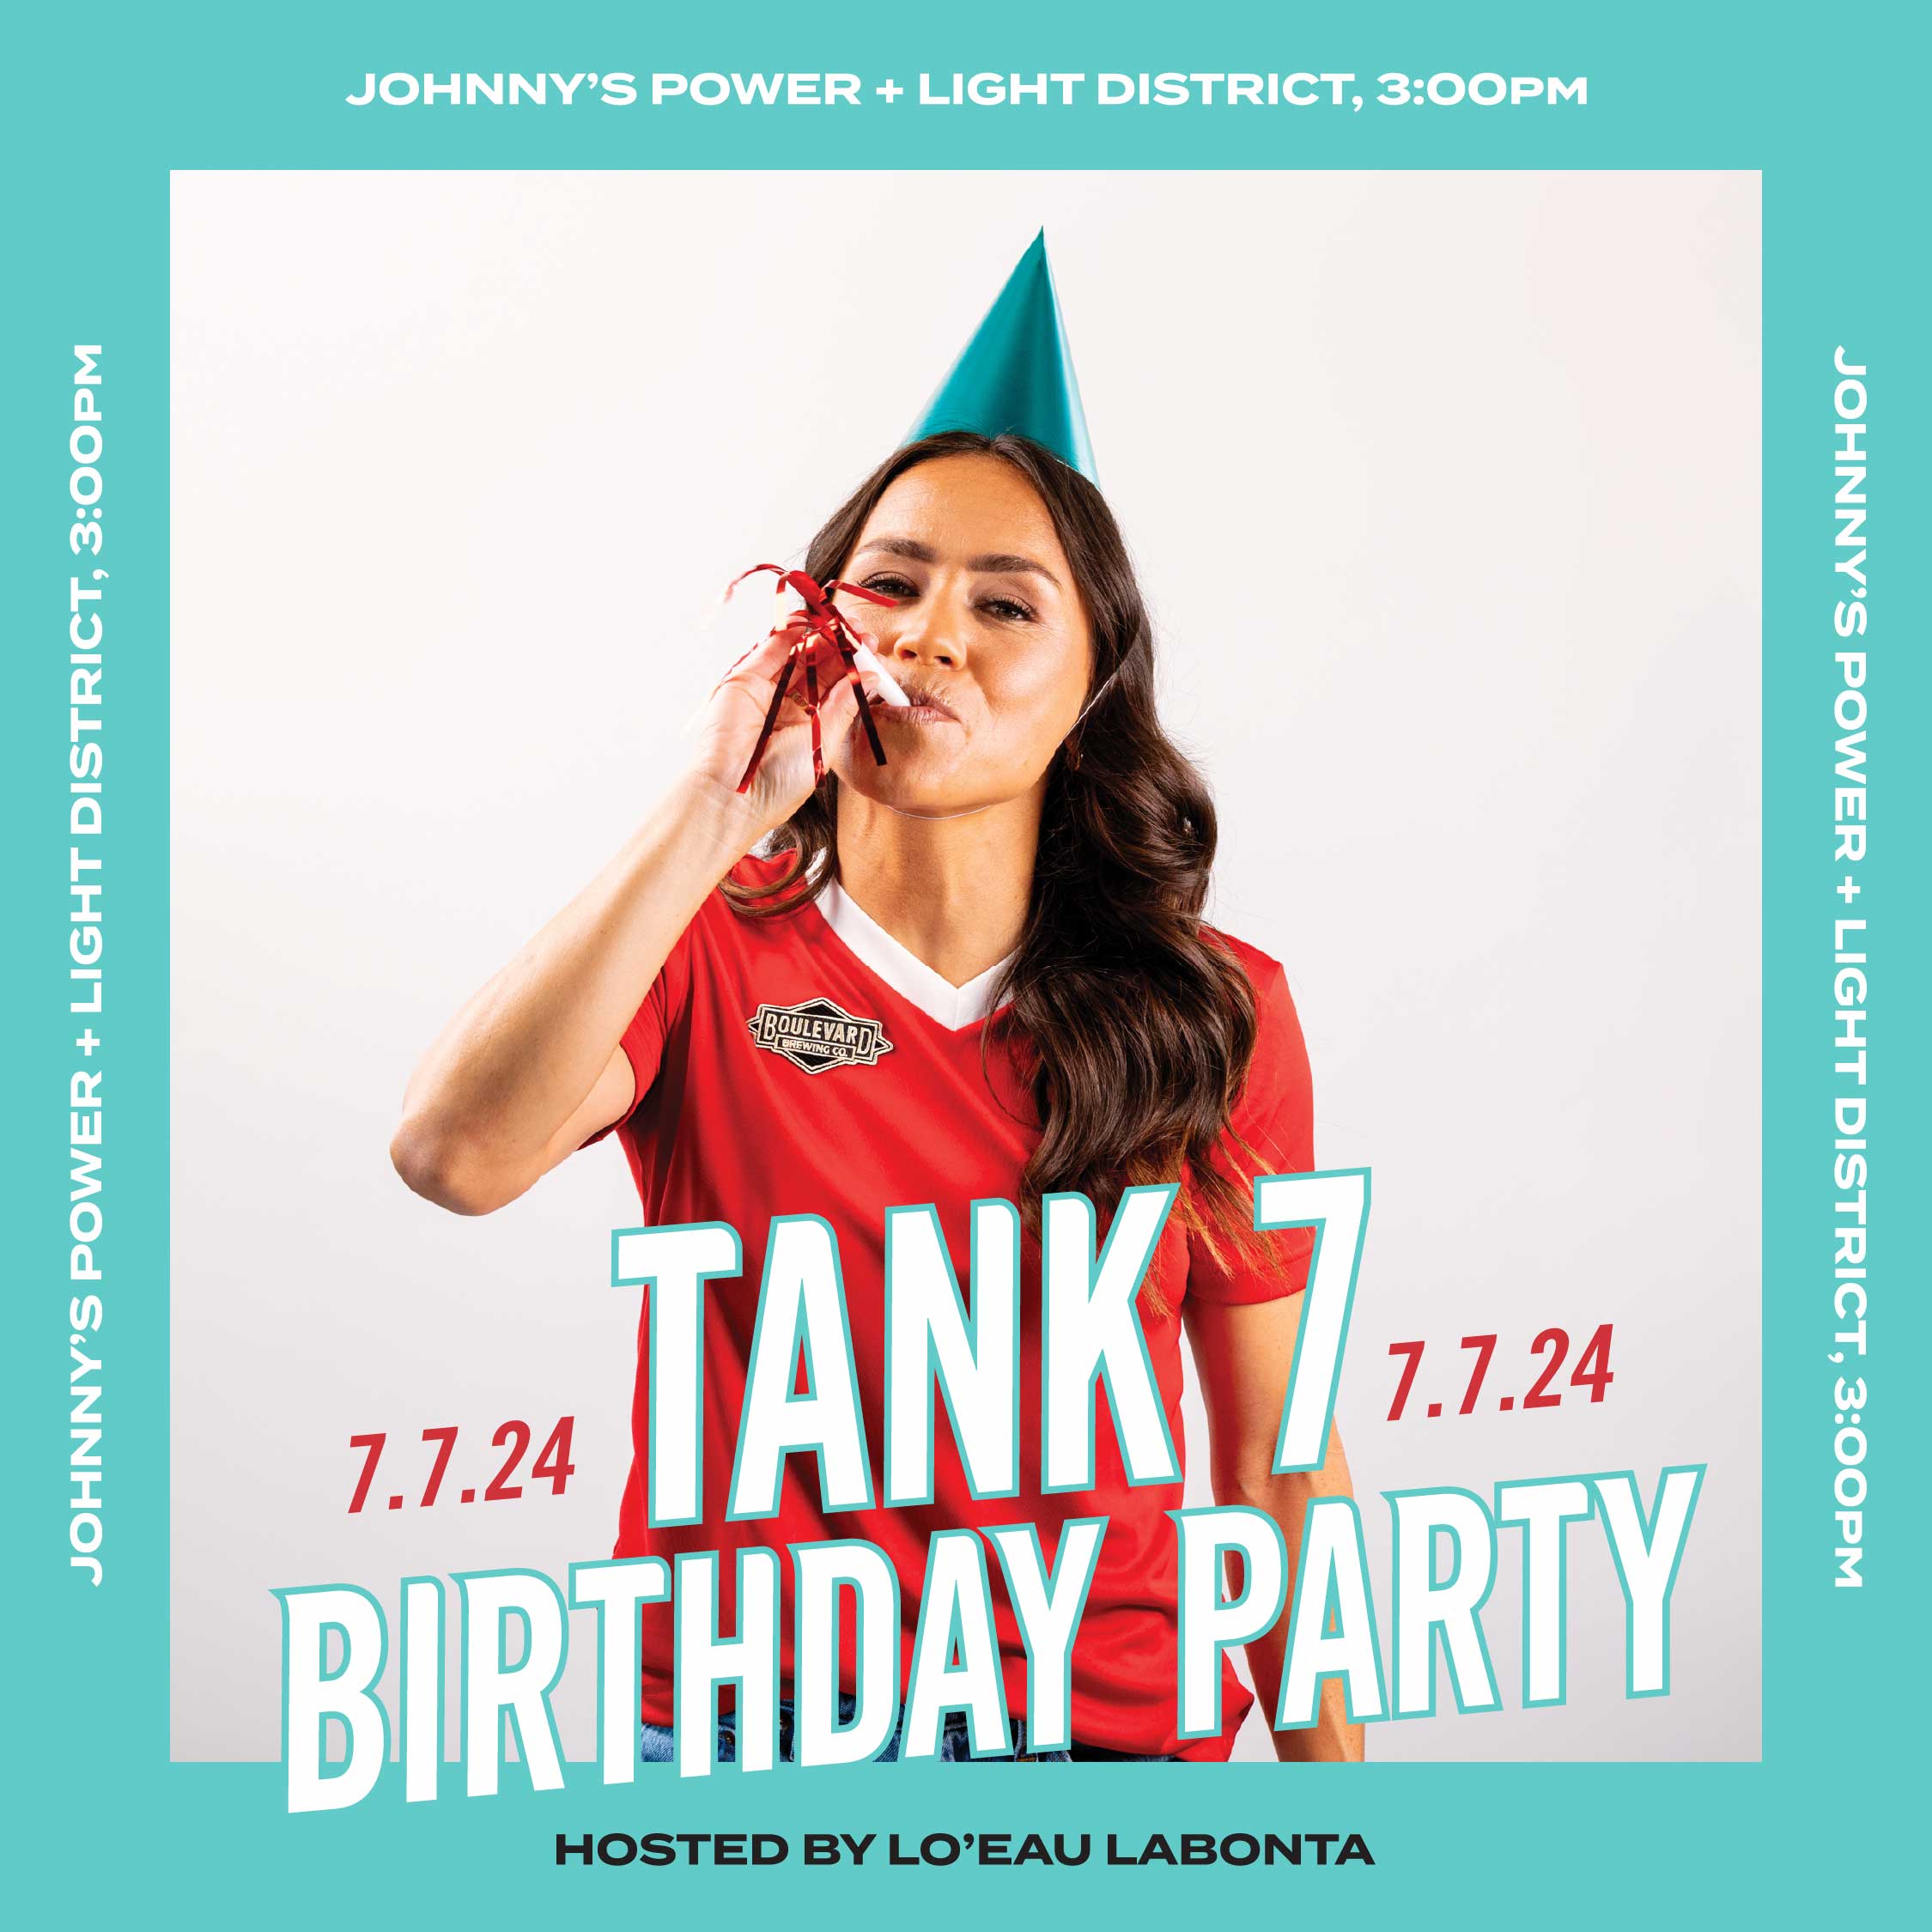 Tank 7 Birthday Party hosted by Lo’eau LaBonta